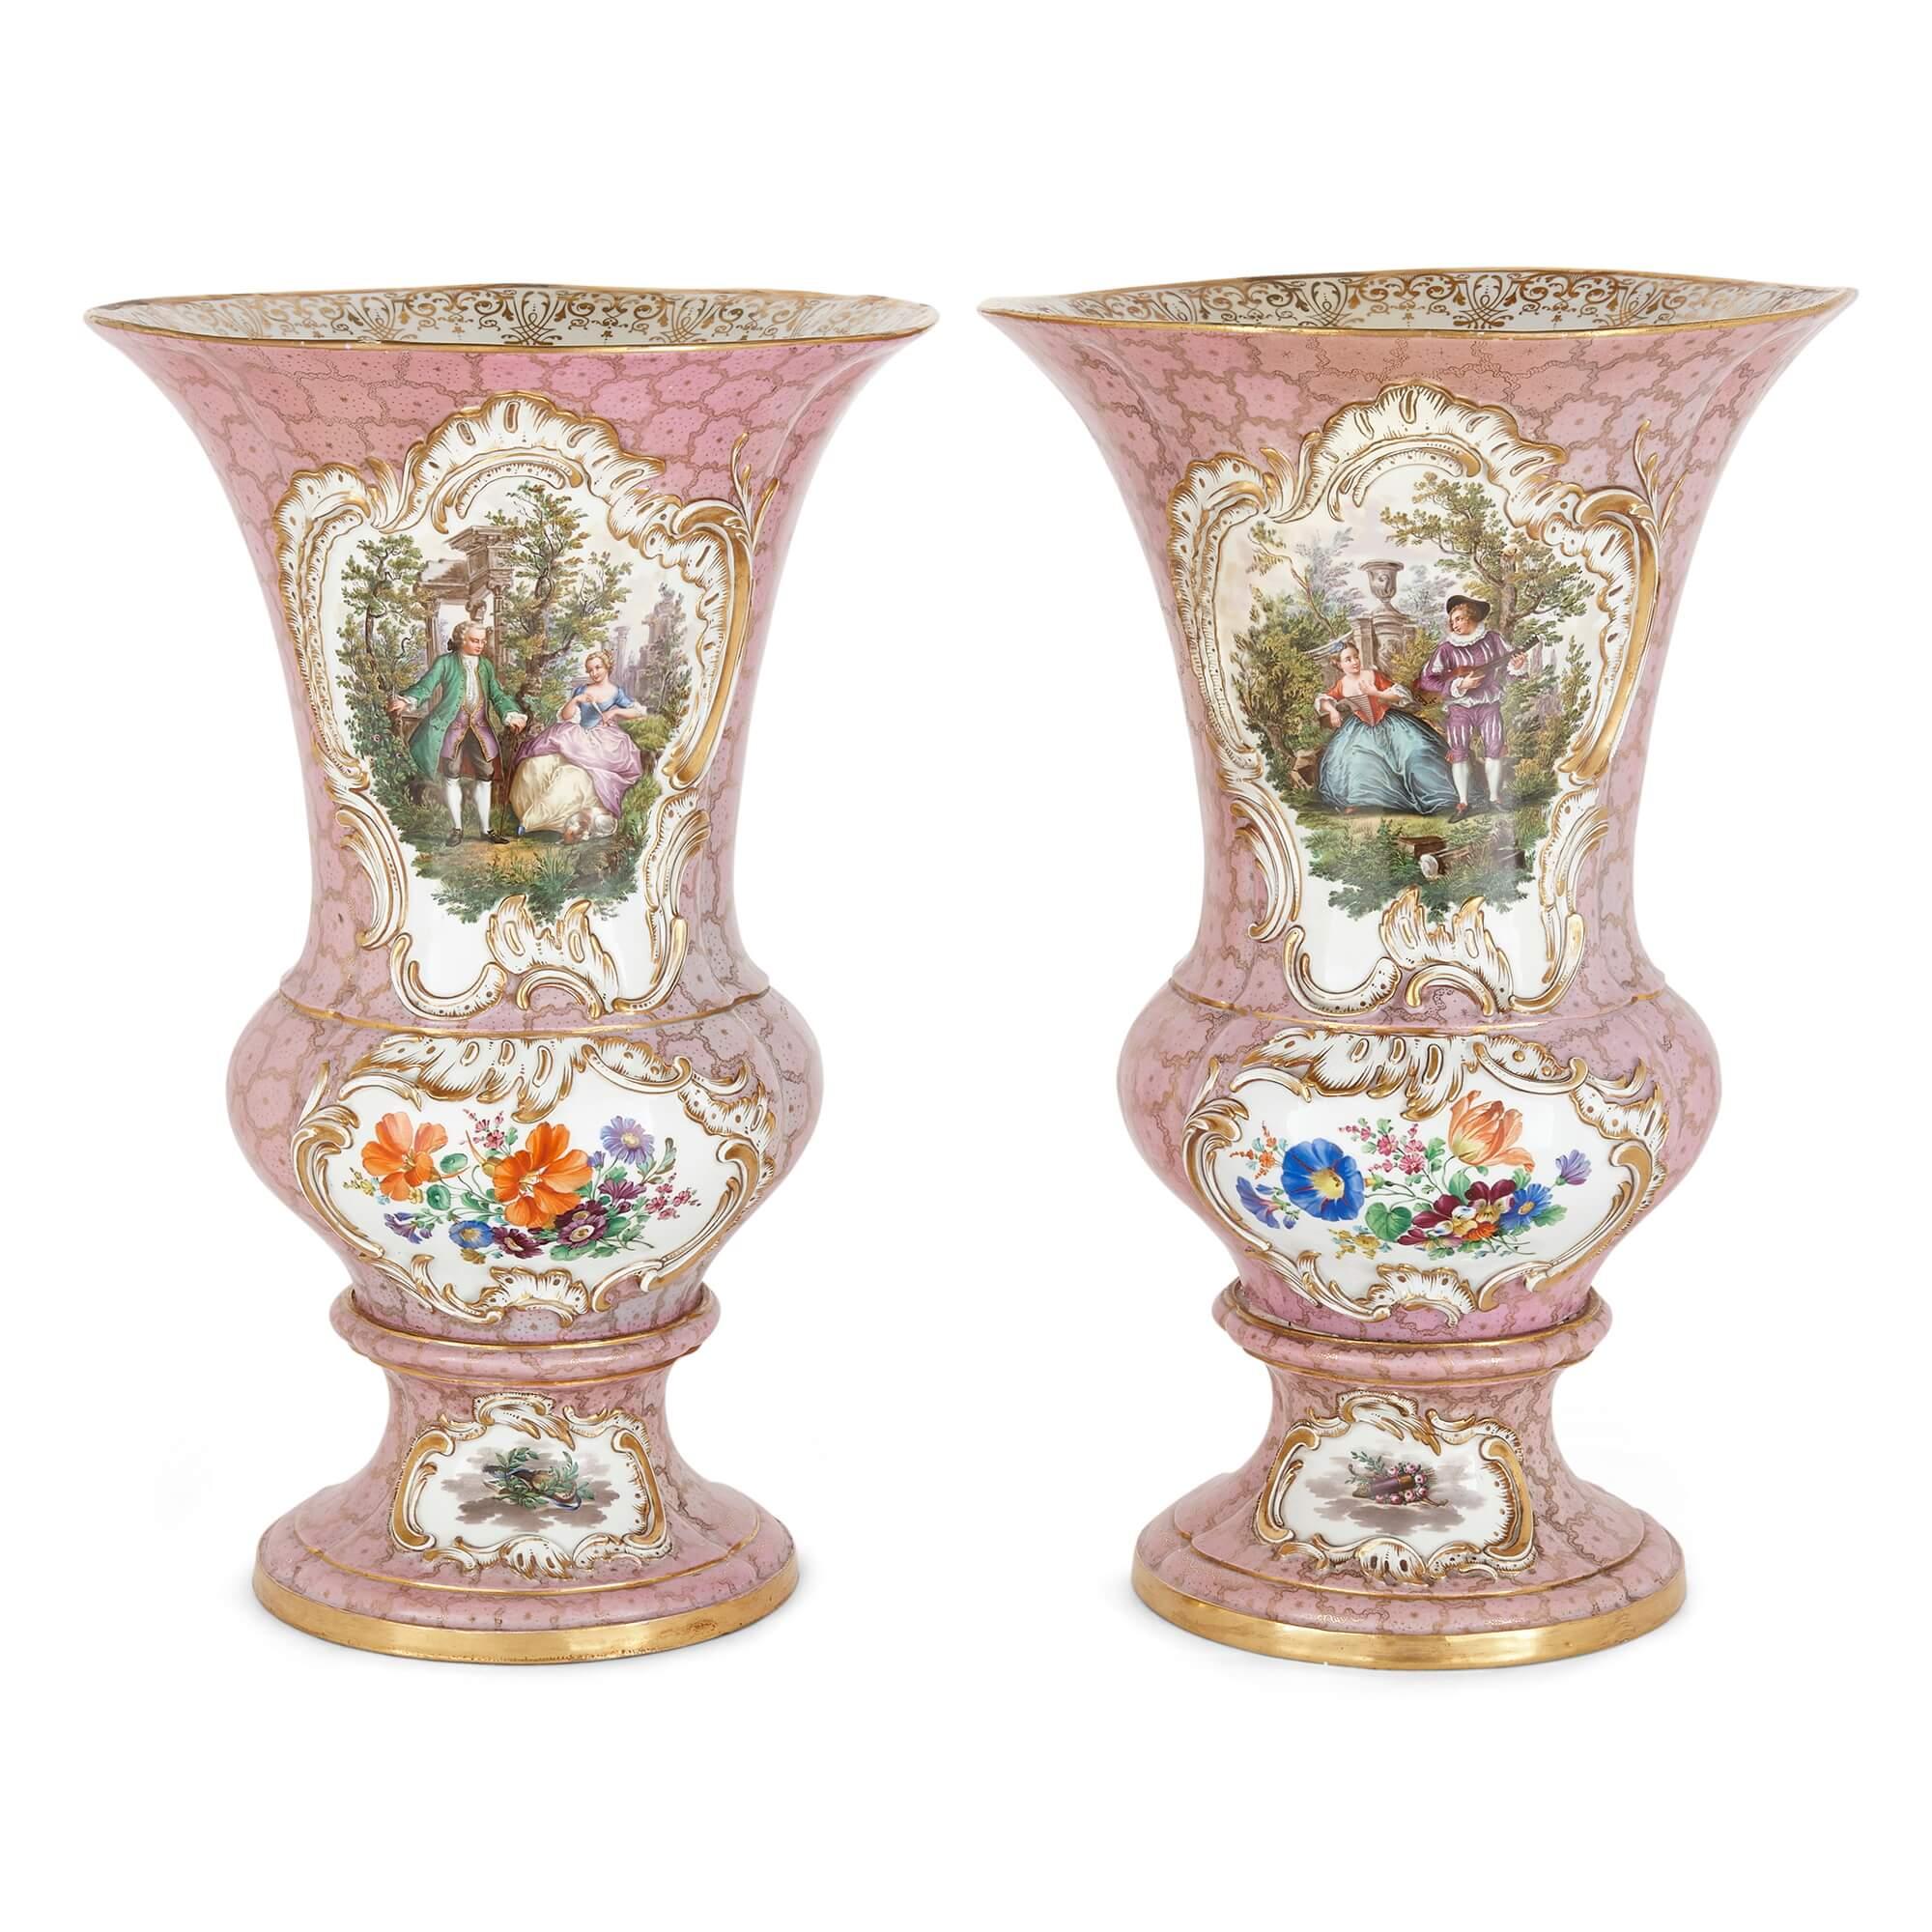 Pair of large pink-ground Meissen Porcelain floral vases 
German, Late 19th century 
Height 48, diameter 31cm

Manufactured by the renowned German porcelain manufactory, this impressive pair of porcelain vases is adorned with flowing